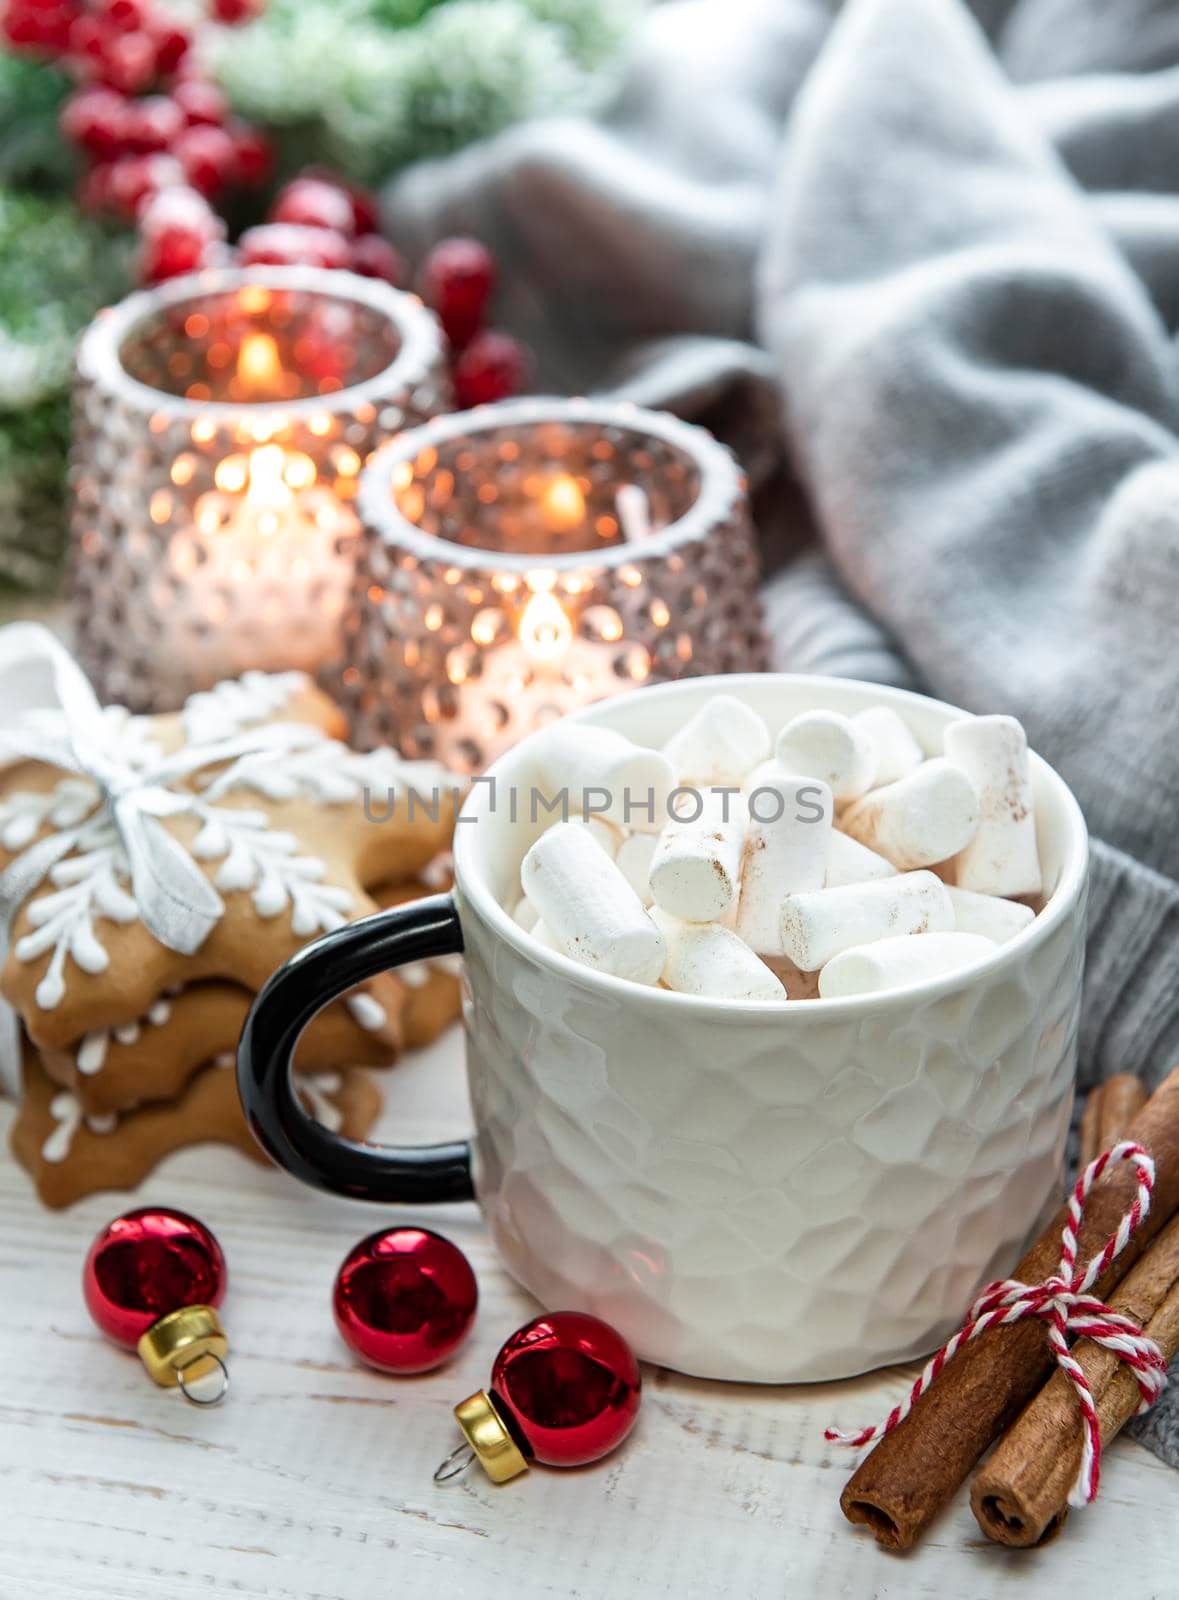 Christmas decorations, cocoa and gingerbread cookies. by Almaje